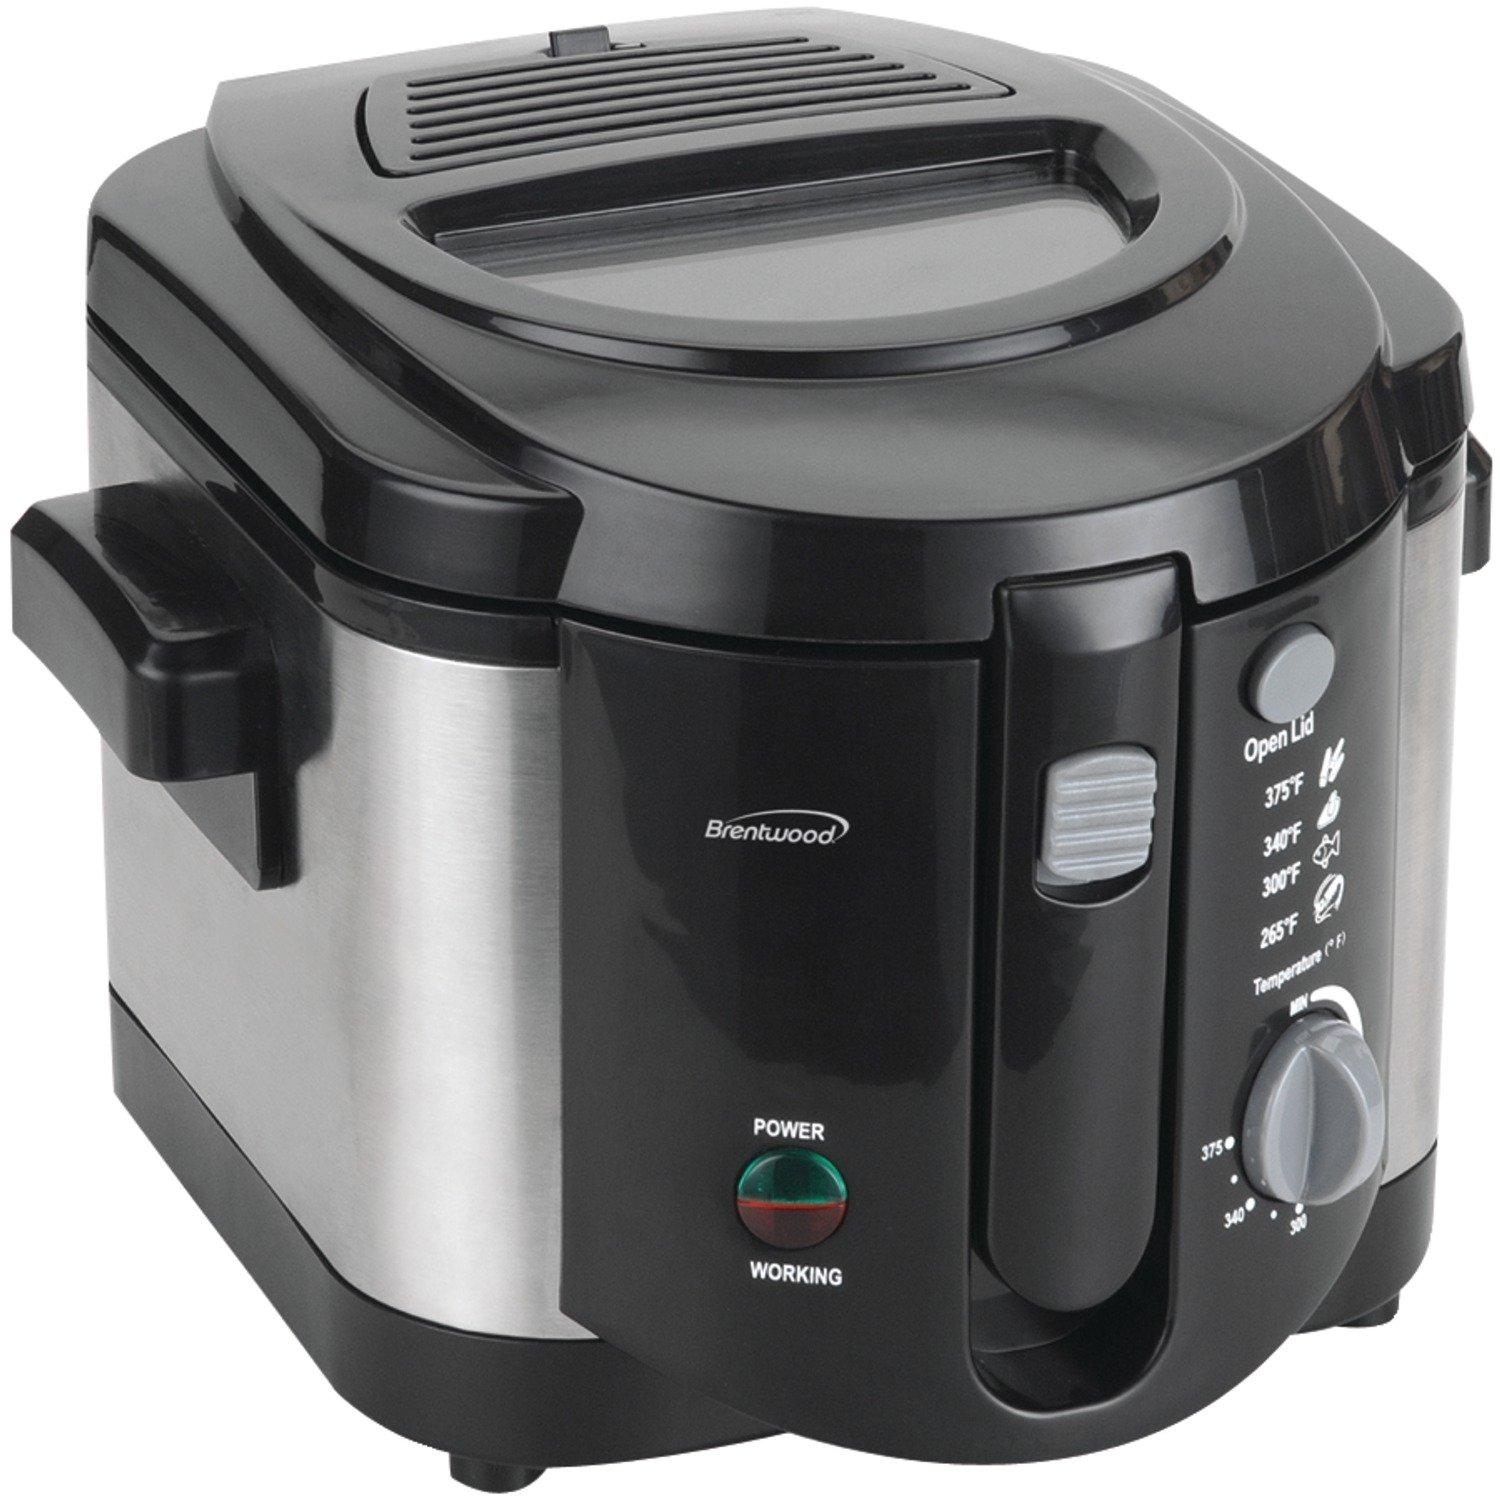 BRENTWOOD® DF-720 8-CUP ELECTRIC DEEP FRYERBRENTWOOD® DF-720 8-CUP ELECTRIC DEEP FRYER